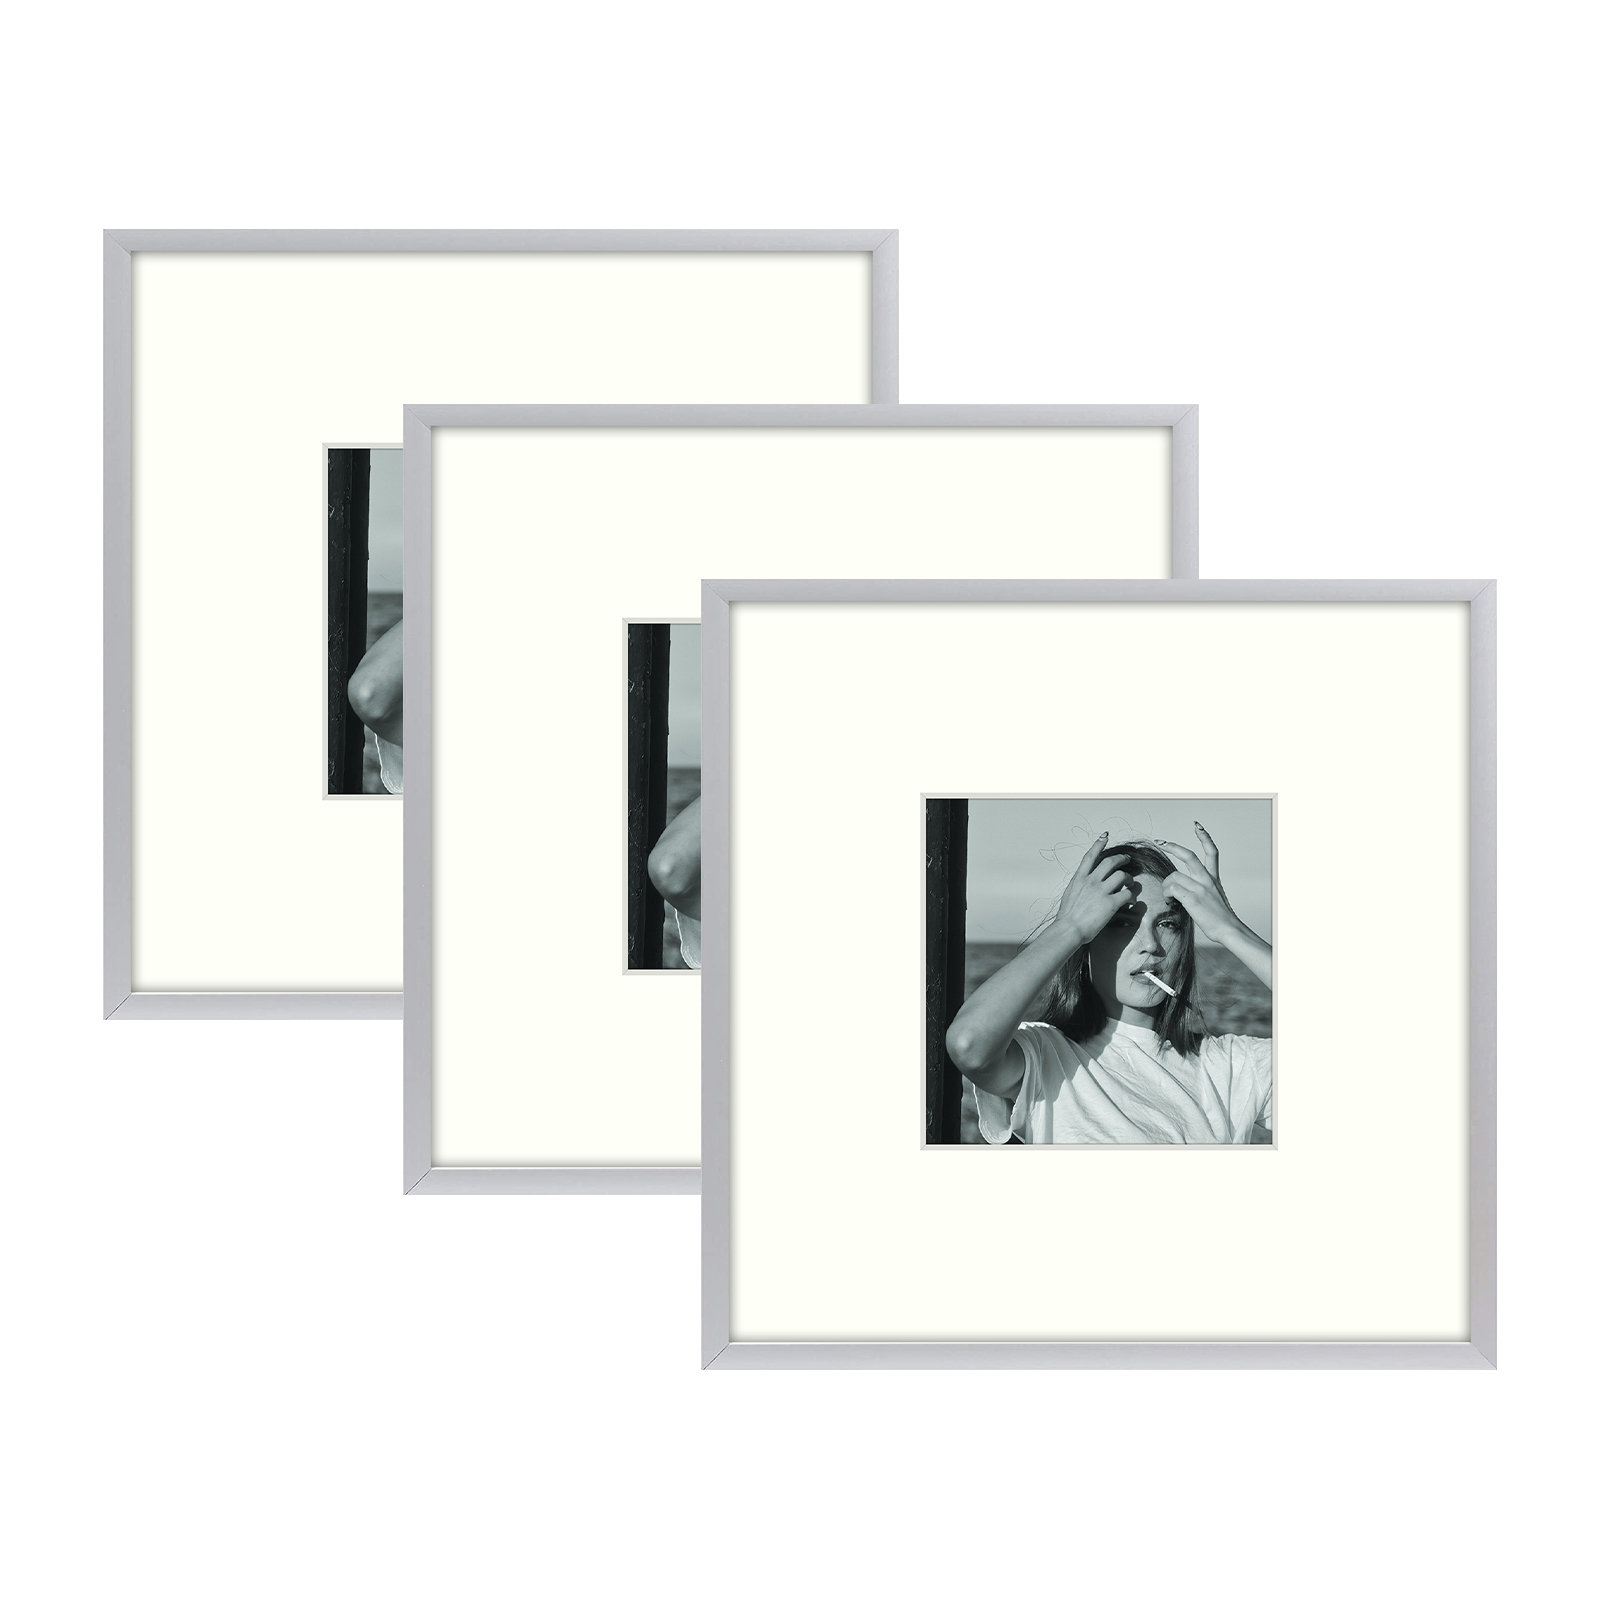 Haus and Hues 8x8 Black Picture Frame 8 X 8 Picture Frame Black Frame, 8x8  Frame With Mat Square Picture Frames 